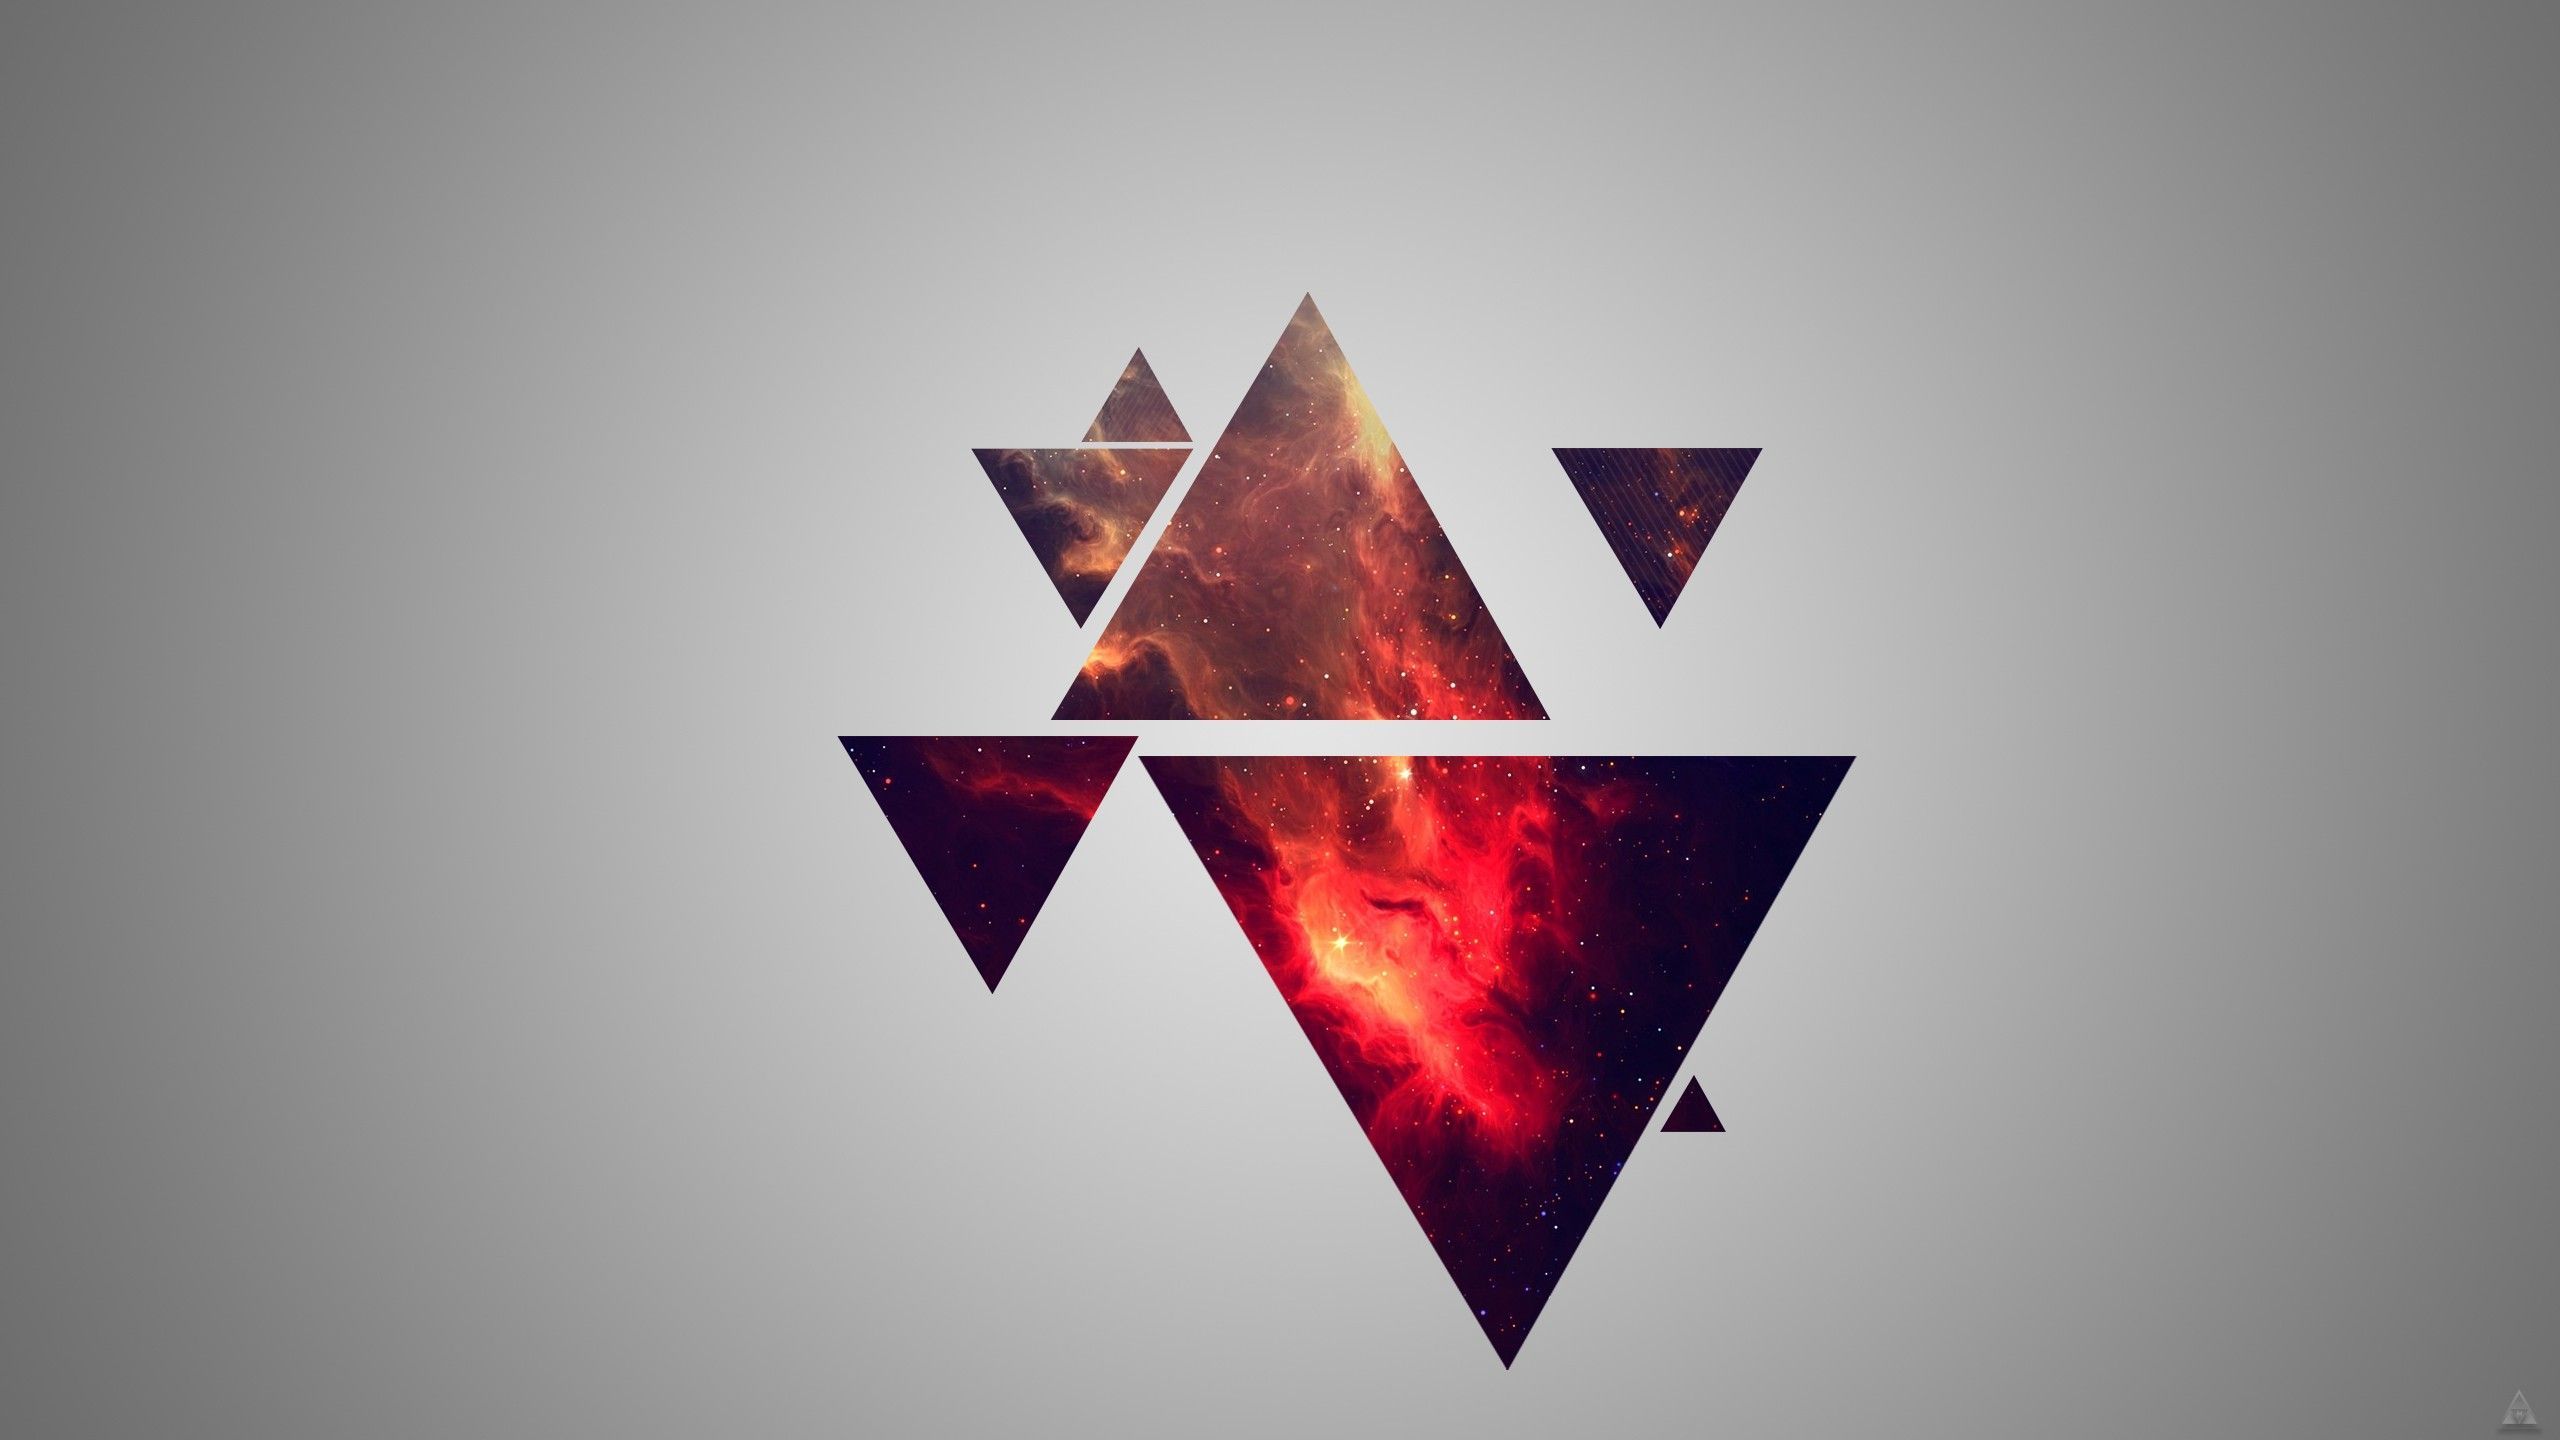 Triangle Galaxy Wallpapers On Wallpaperdog